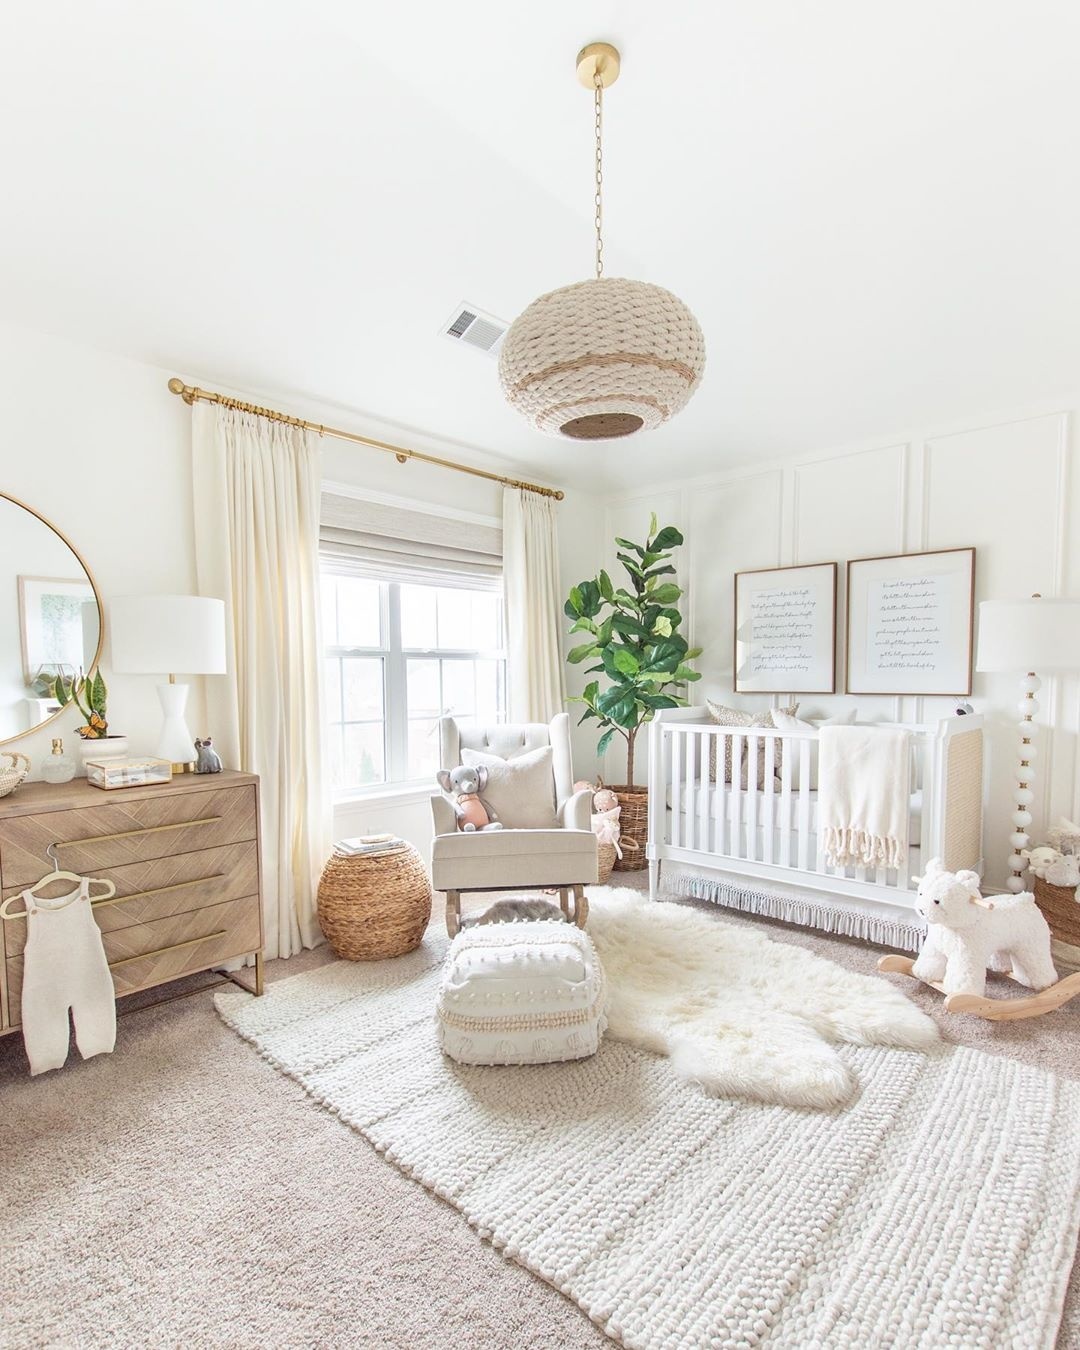 20 Baby Proofing Tips for Your Home